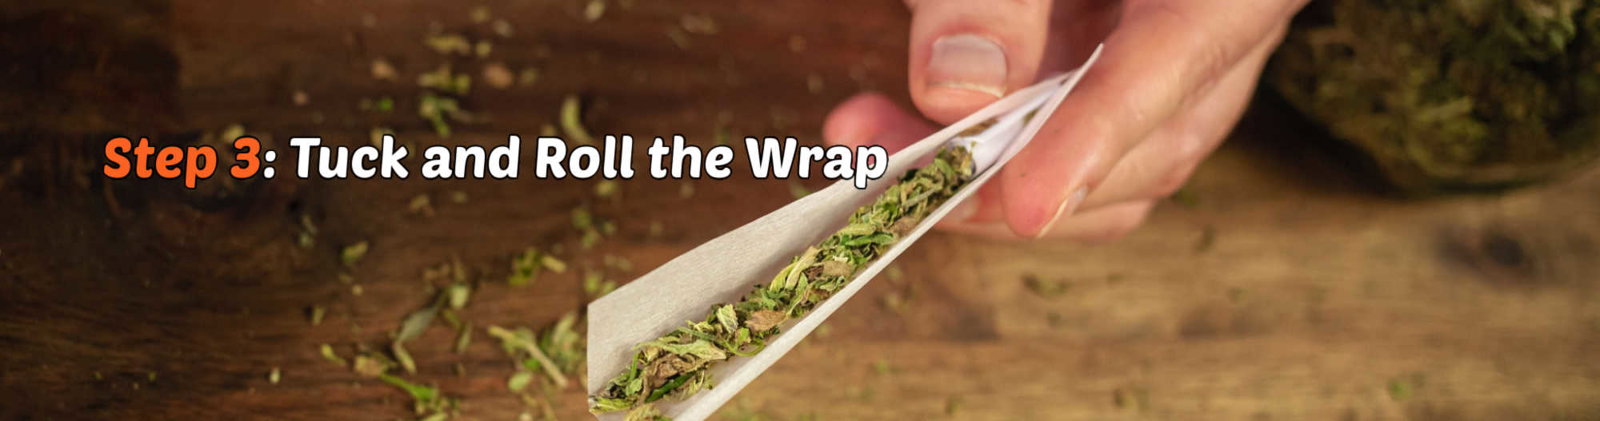 image of tuck and roll the hemp wrap